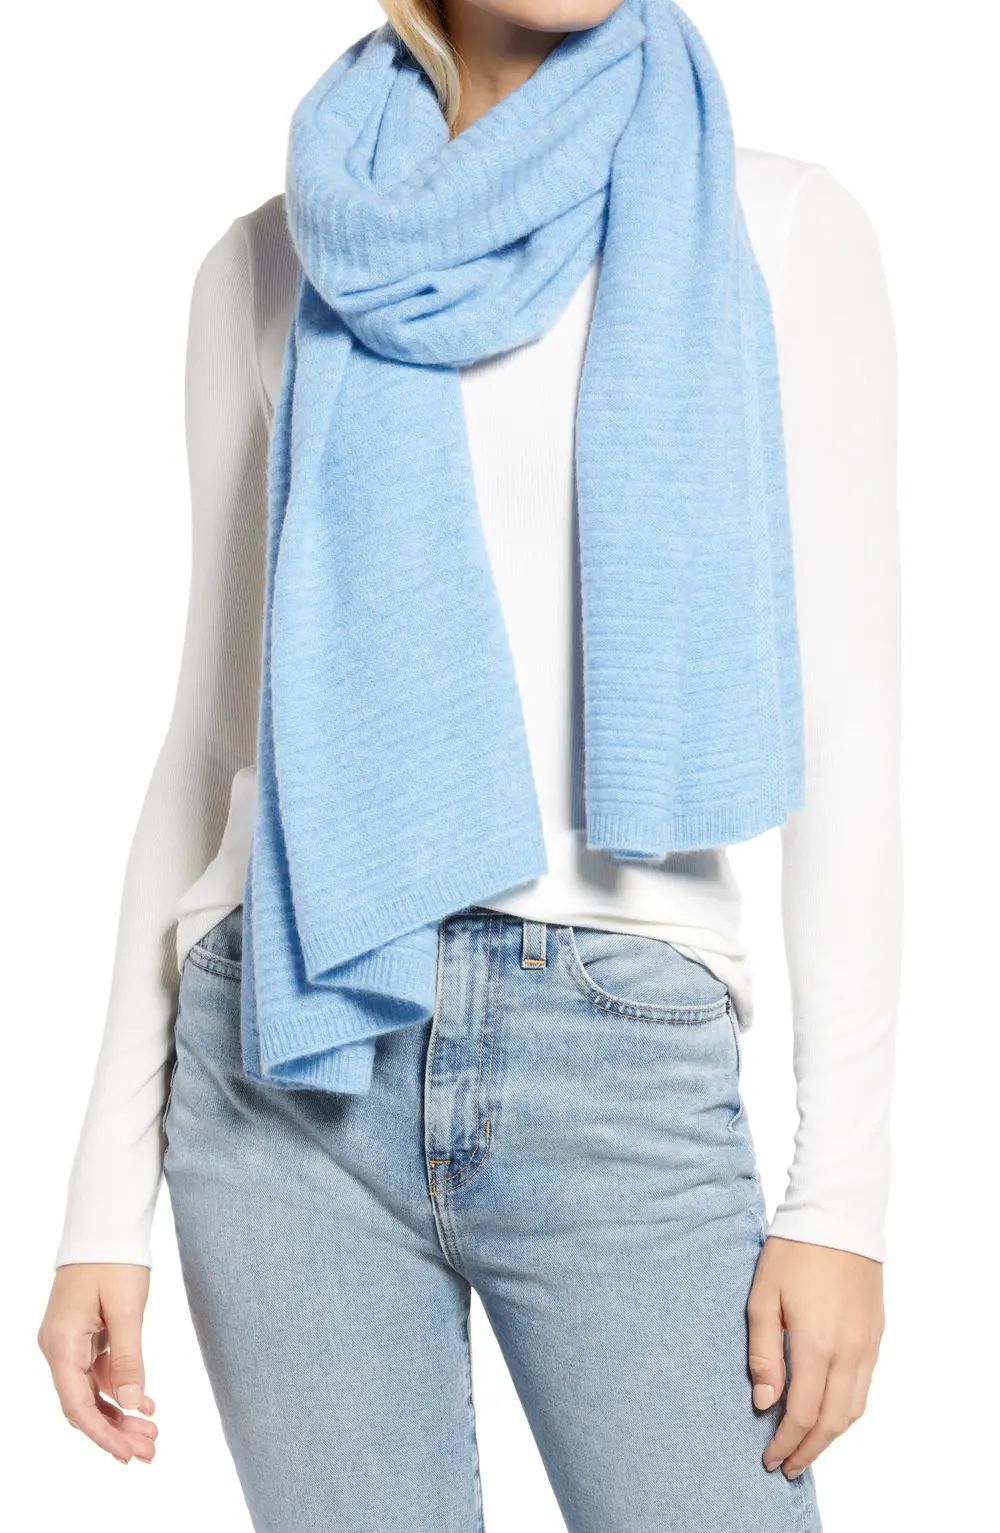 Nordstrom Cashmere Rib Scarf in Blue Lake Heather at Nordstrom | Nordstrom Canada